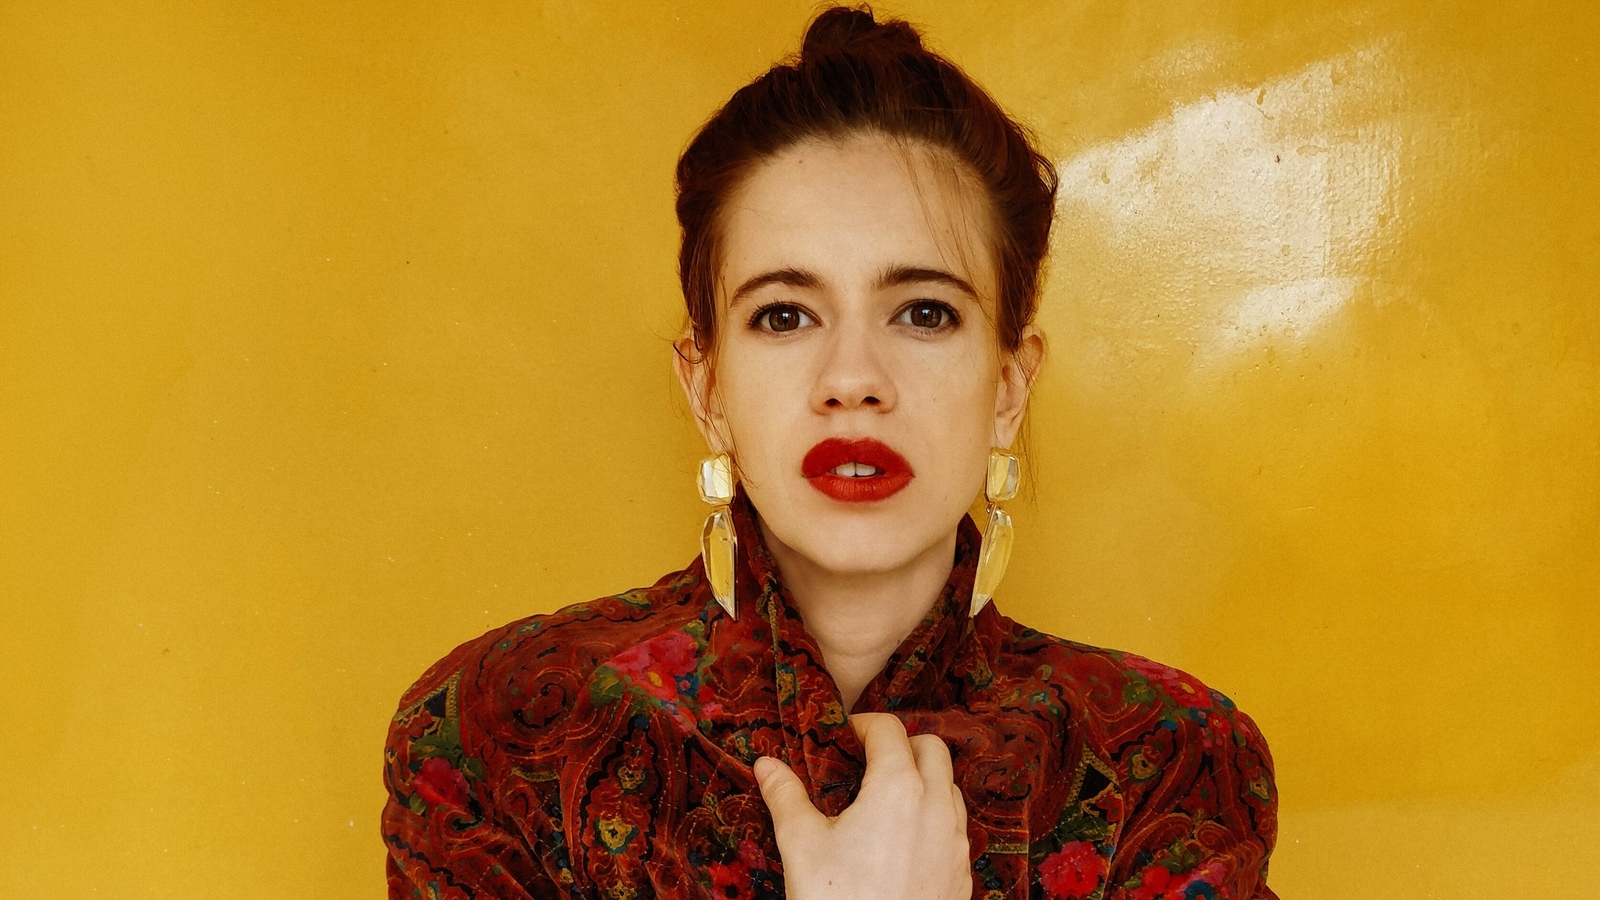 Kalki Koechlin says being stereotyped is frustrating, reveals a director told her she’ll love the role of a ‘psycho’